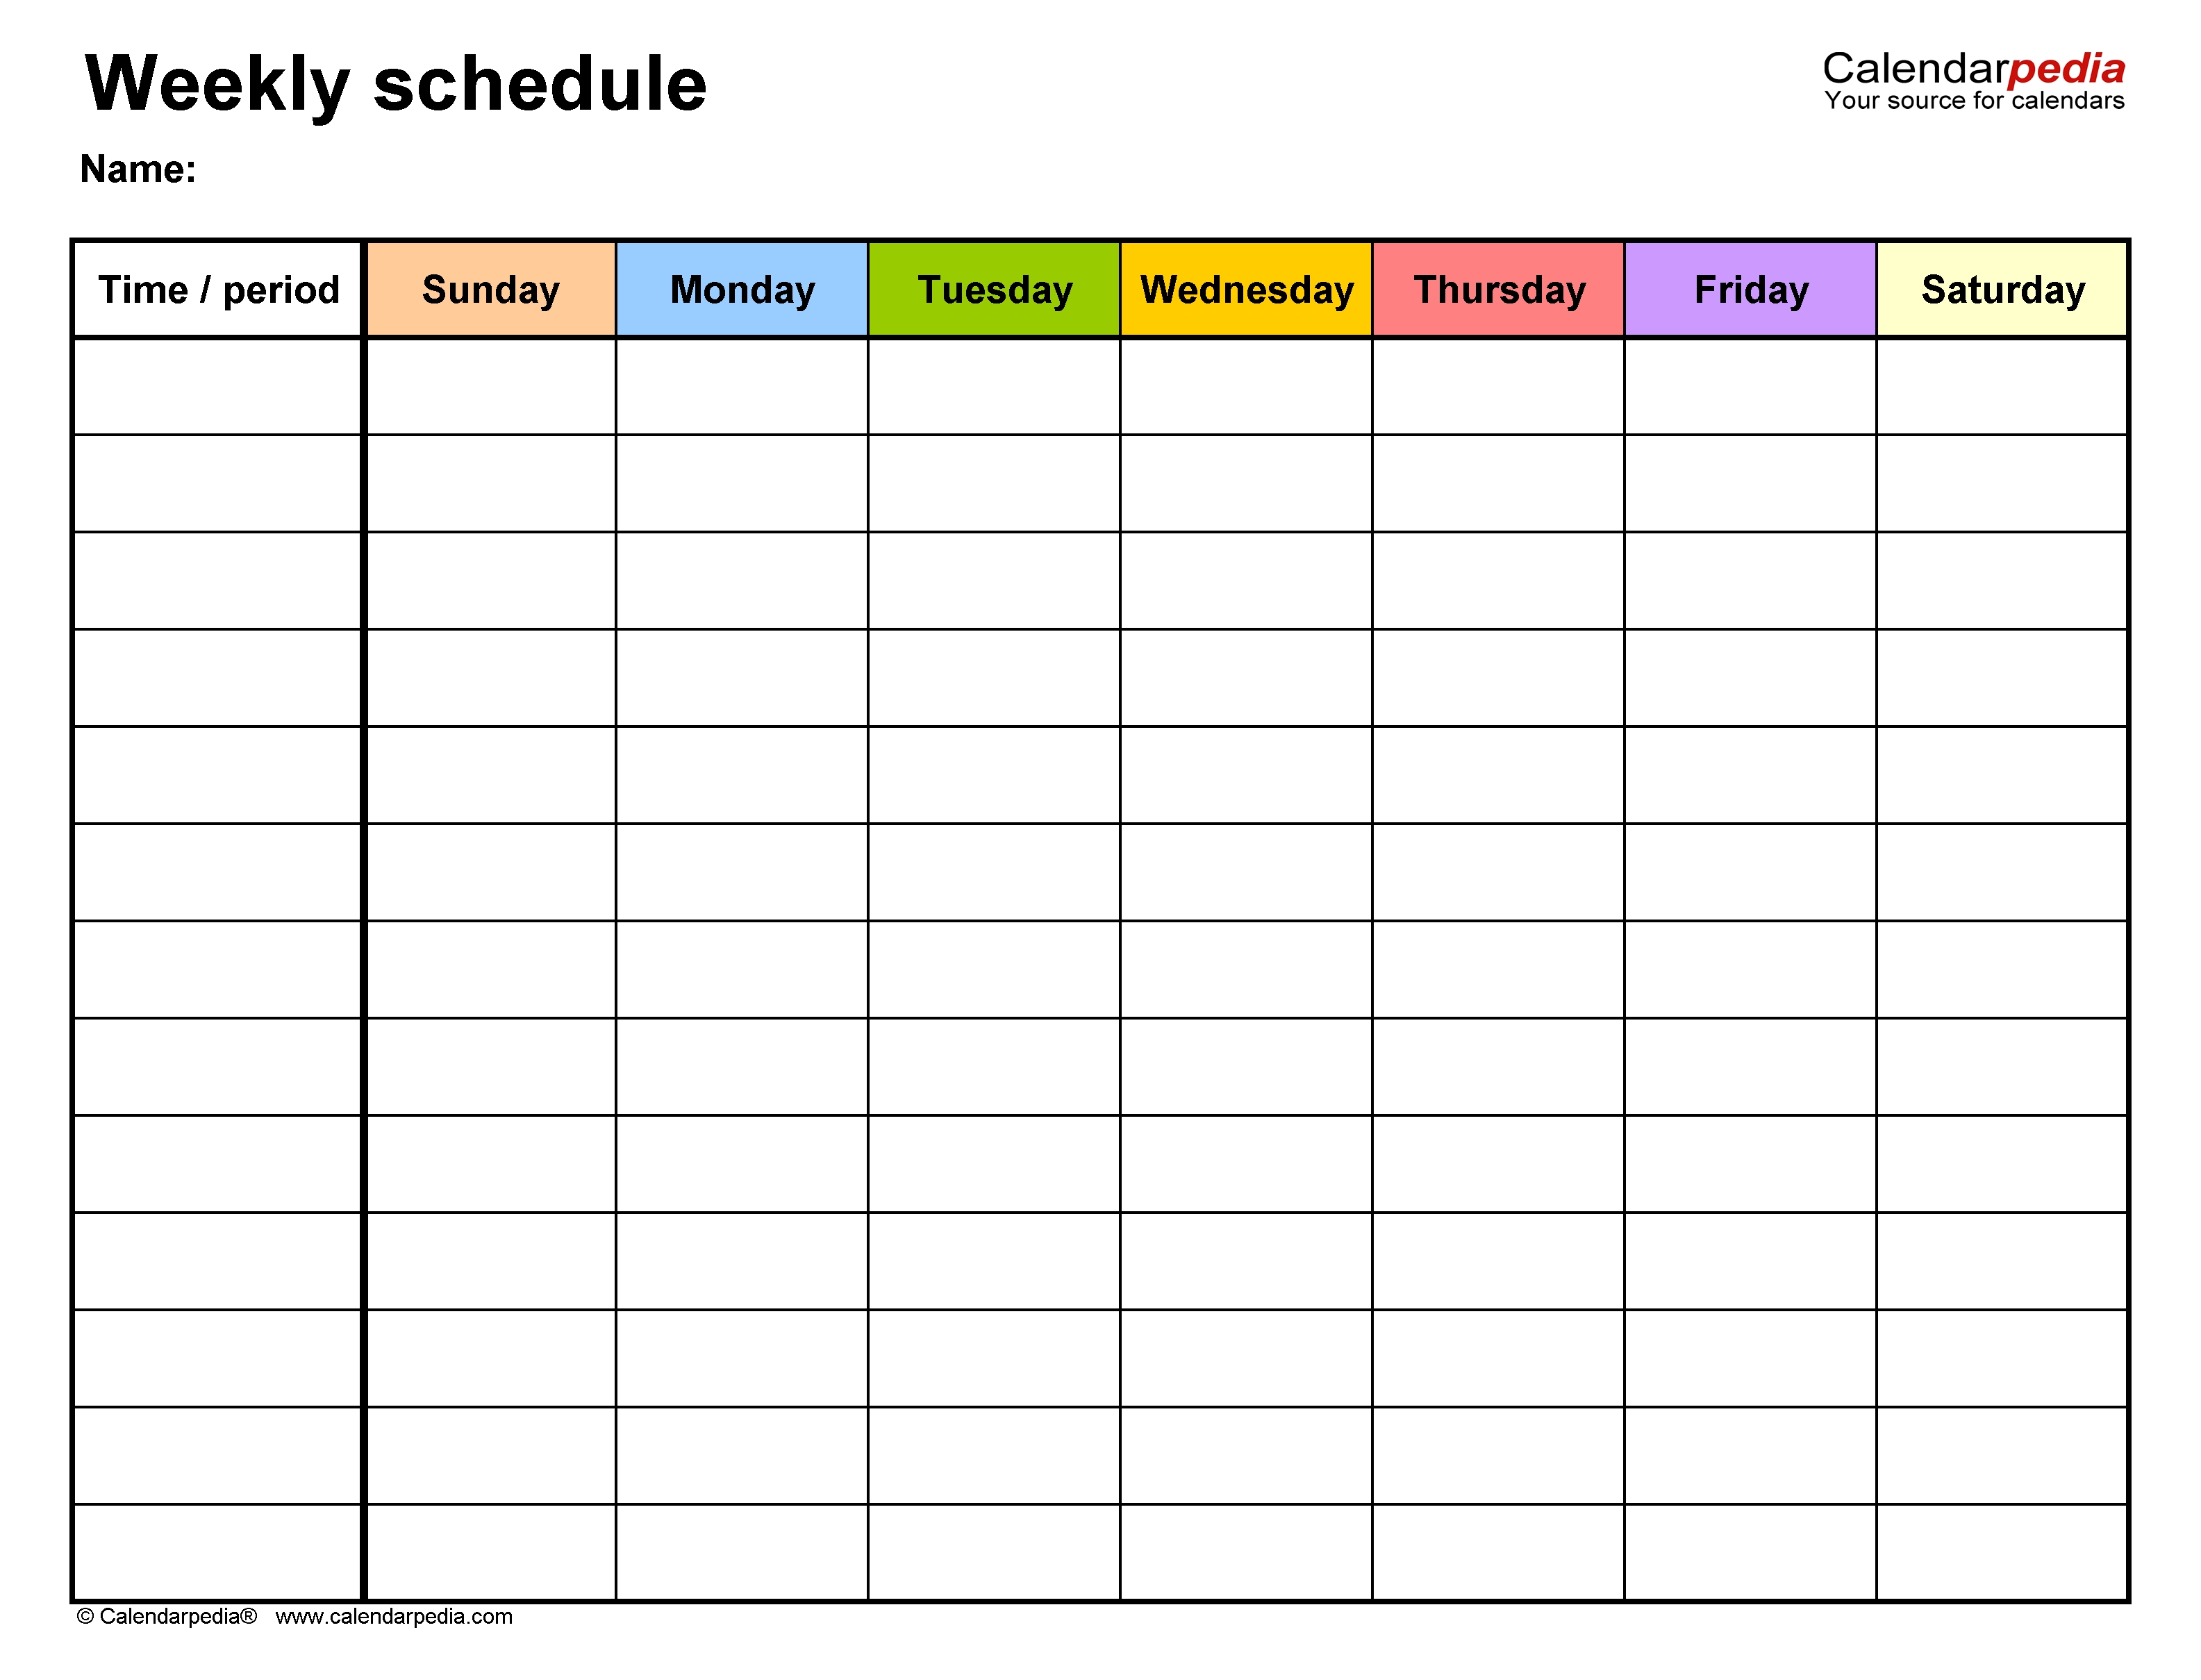 Free Weekly Schedules For Word - 18 Templates Calendar Template Monday Through Sunday